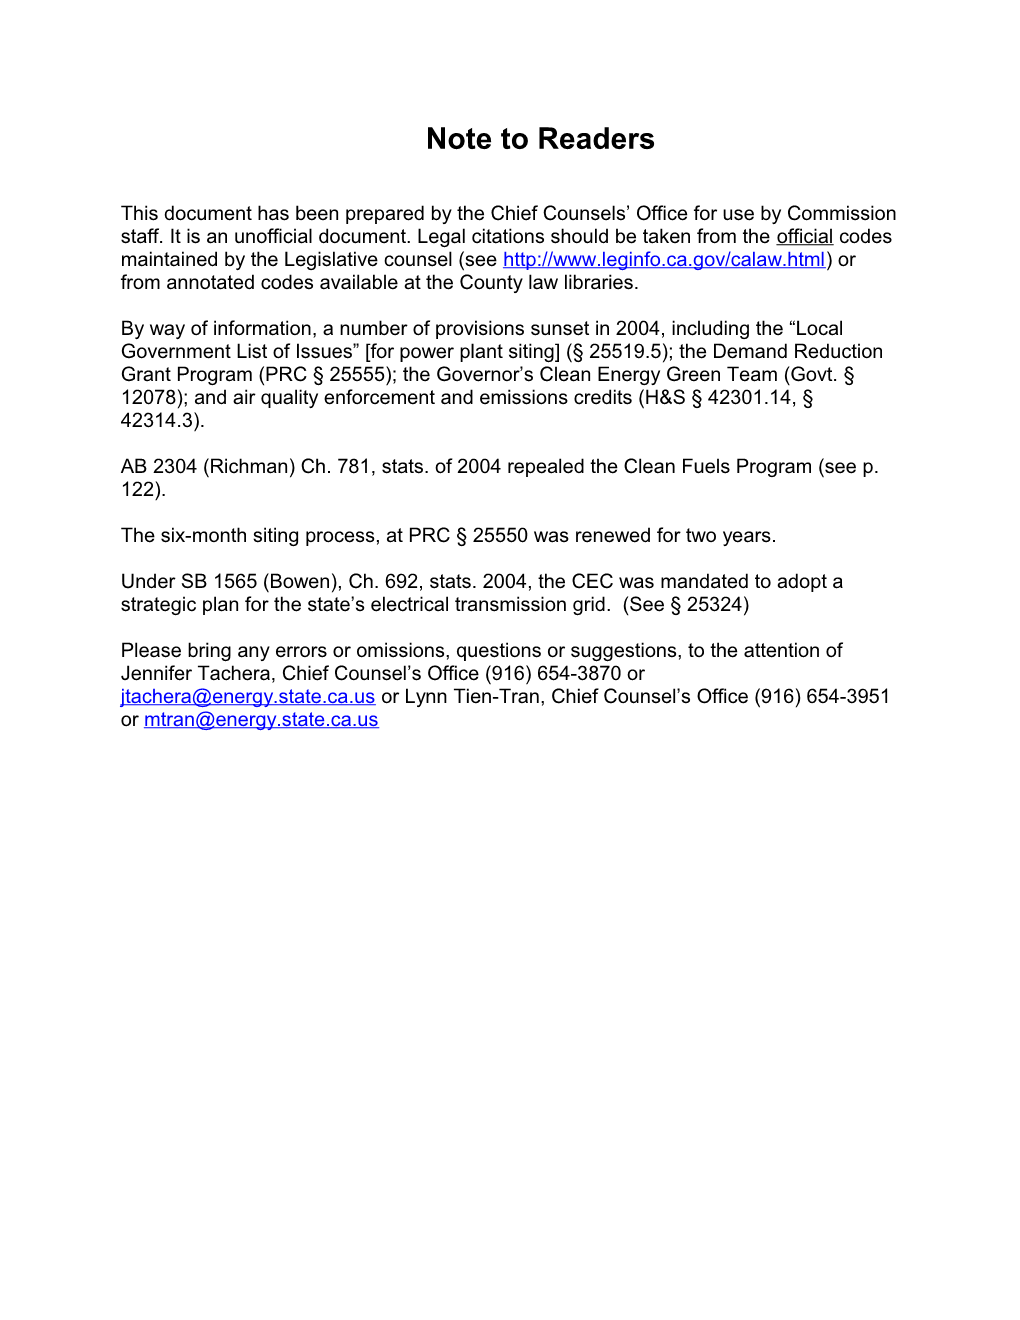 AB 2304 (Richman) Ch. 781, Stats. of 2004 Repealed the Clean Fuels Program (See P. 122)